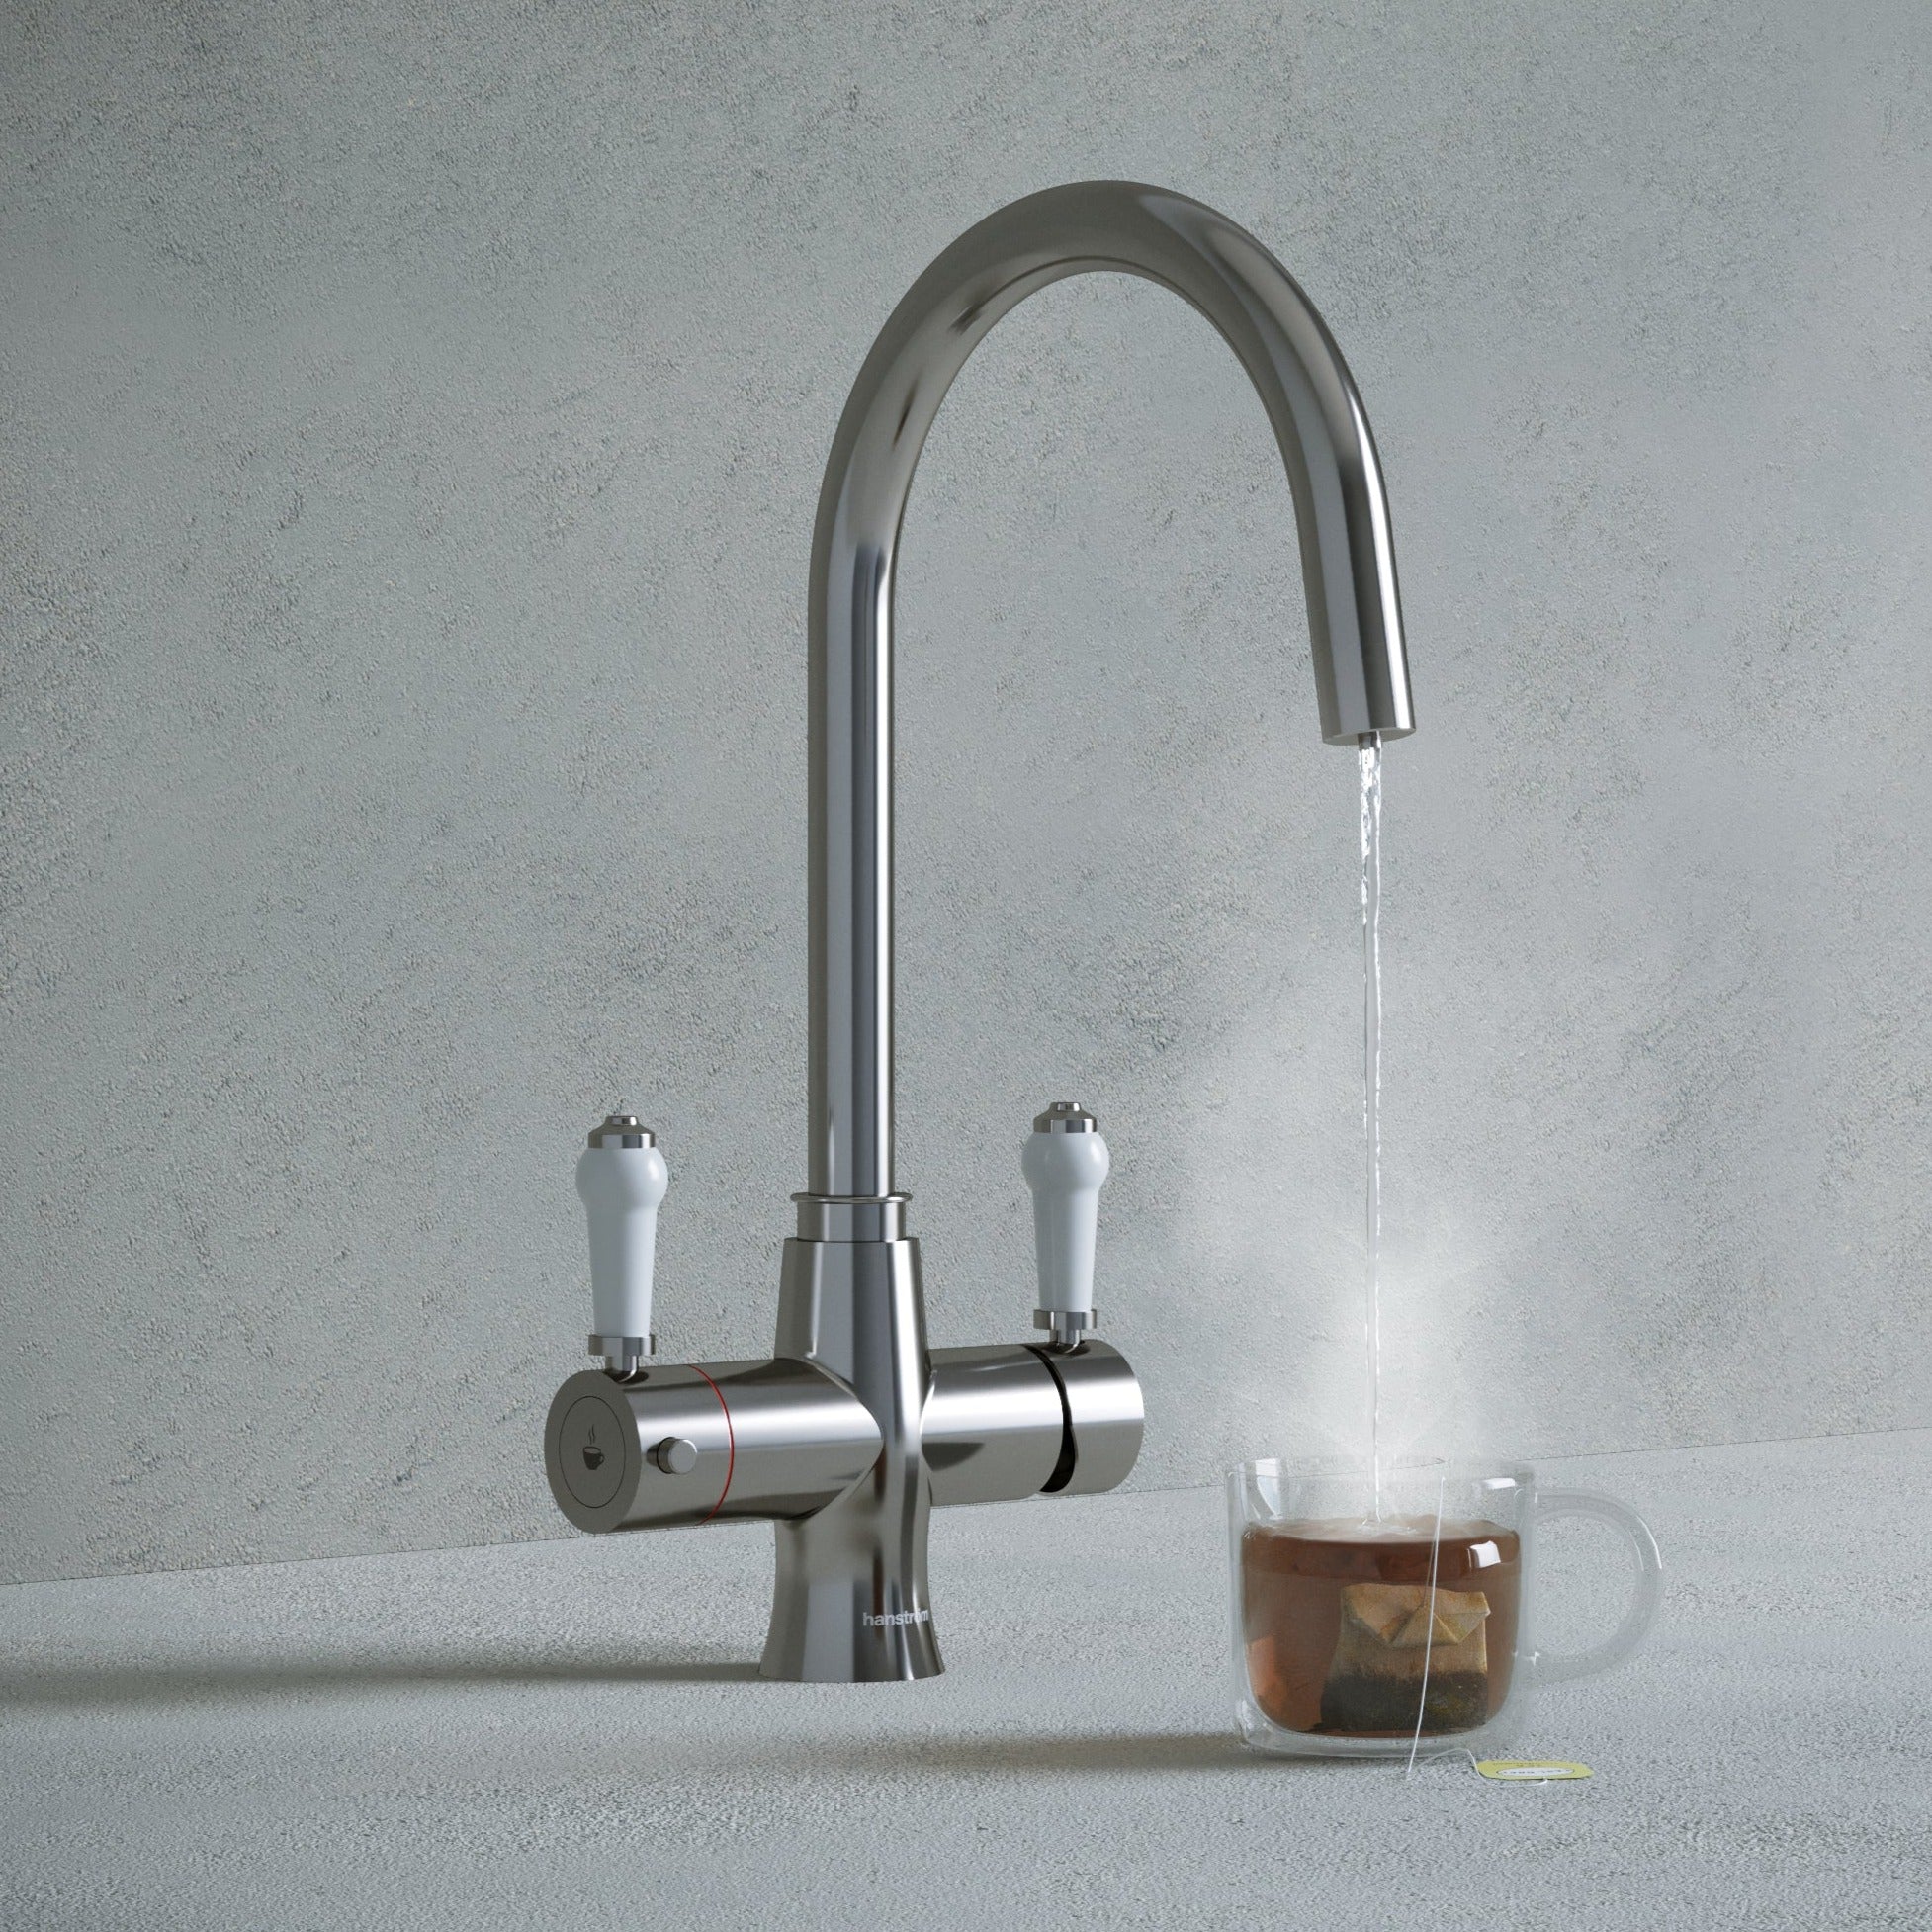 a traditional chrome swan neck kitchen hot tap with white handle